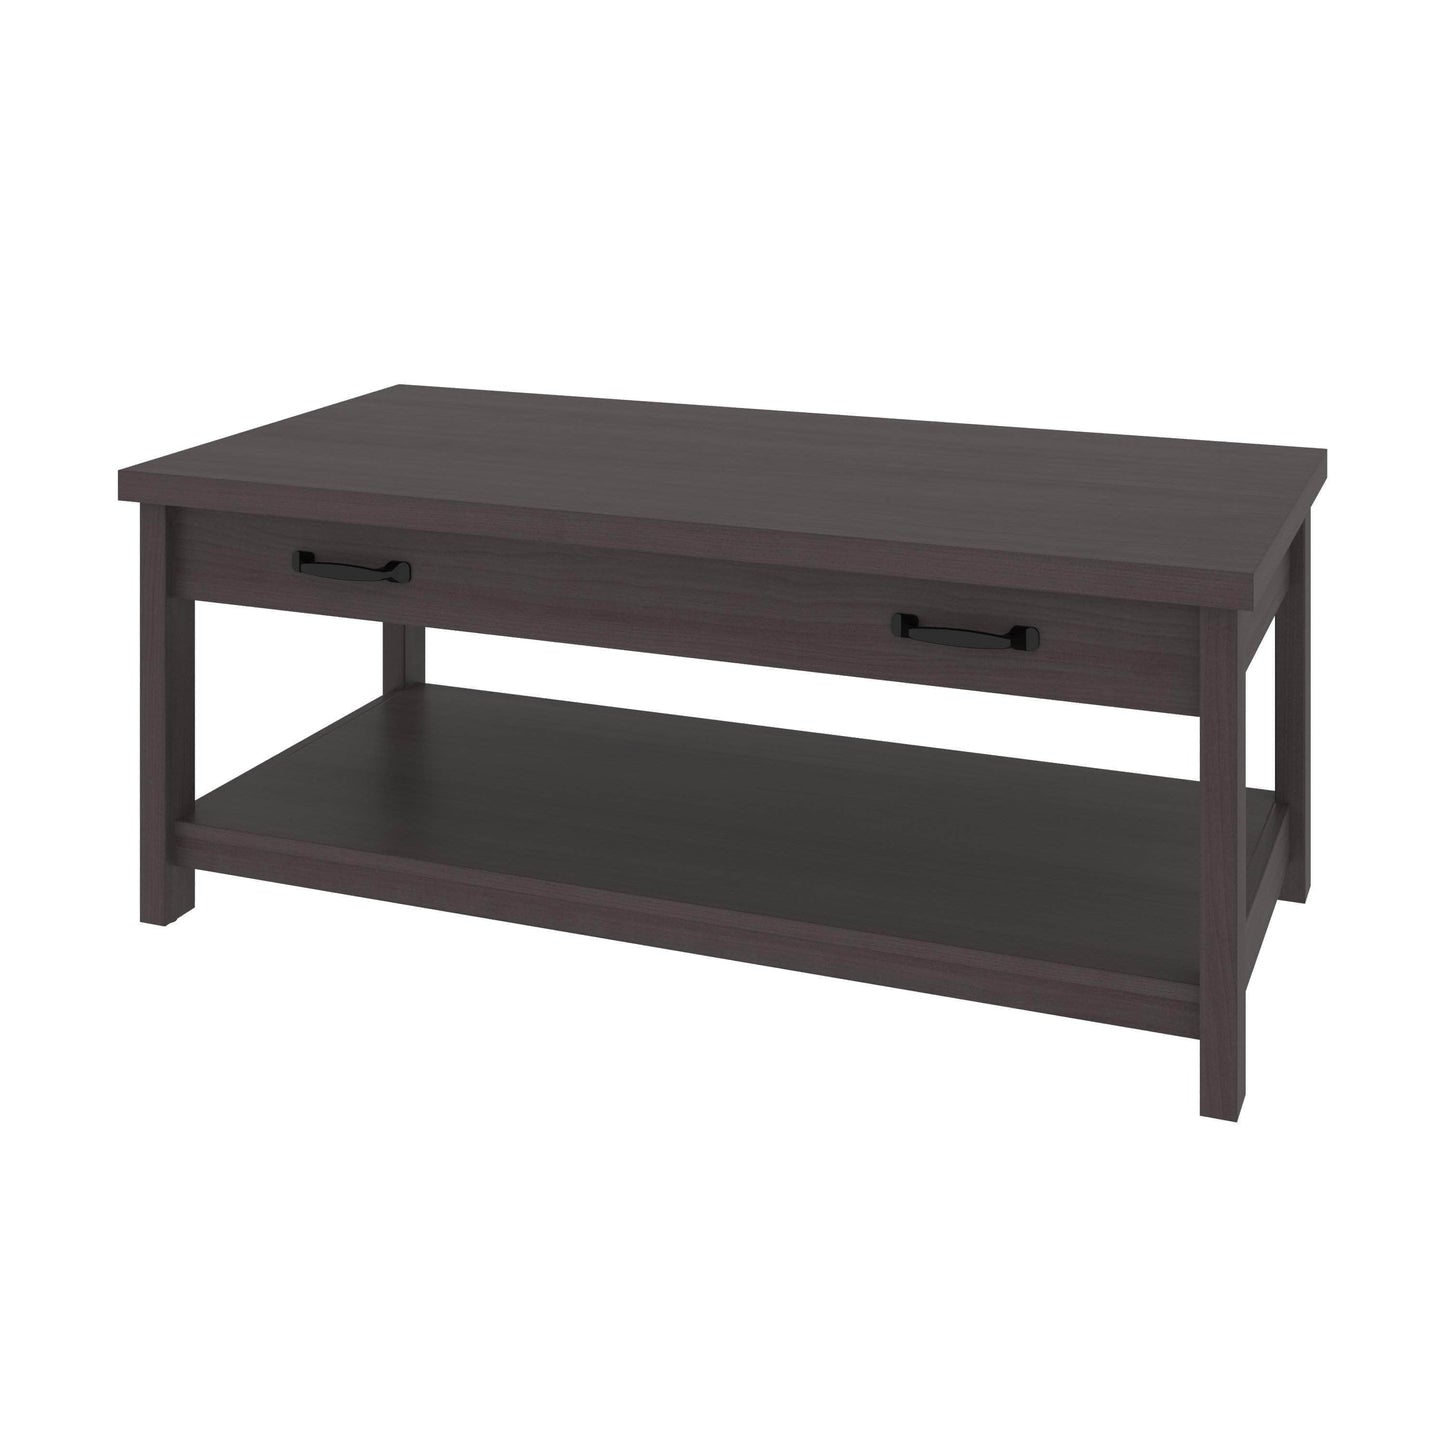 Modubox Coffee Table Storm Grey Isida 44"W Coffee Table - Available in 2 Colours